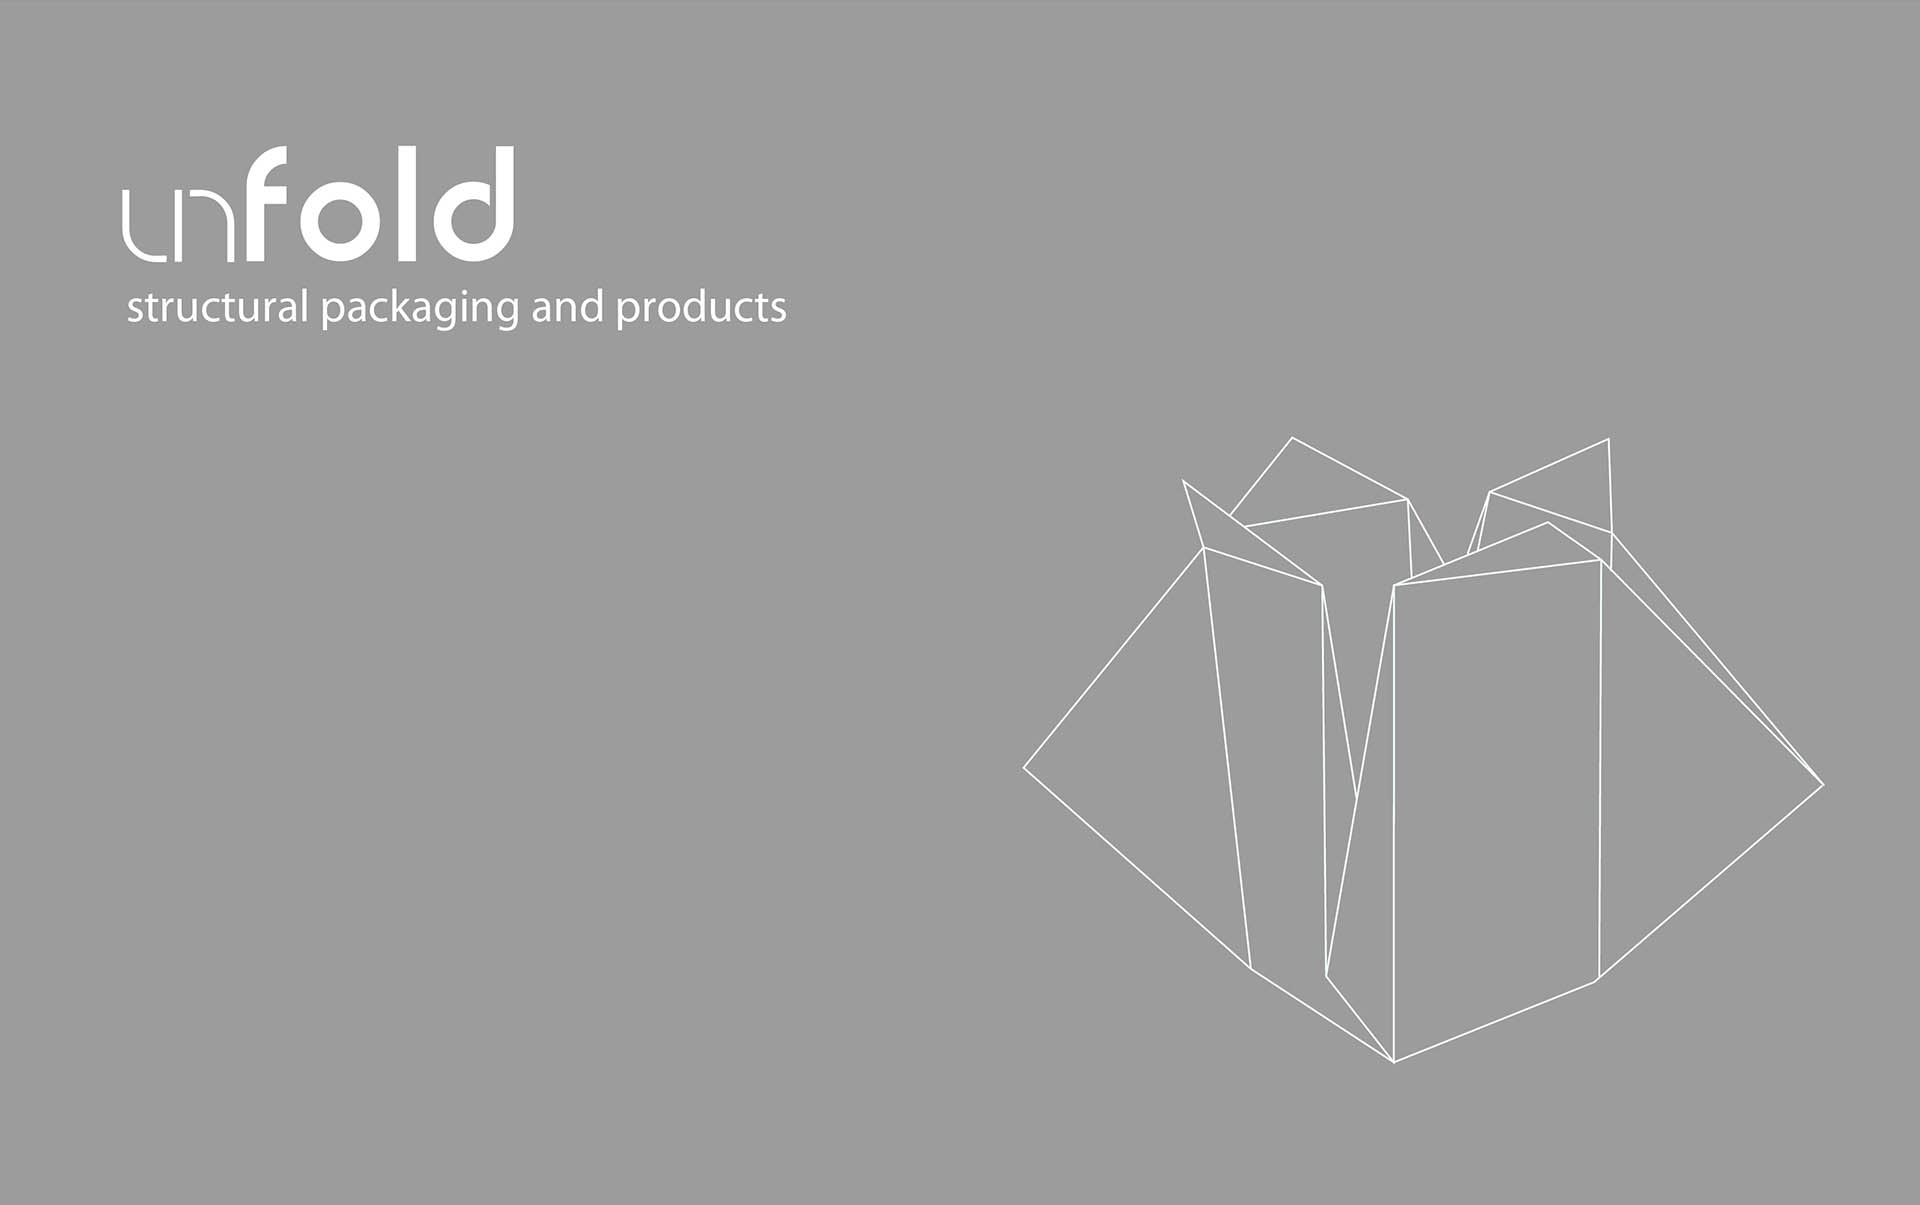 Brand design and promotion for Unfold an experimental packaging concept